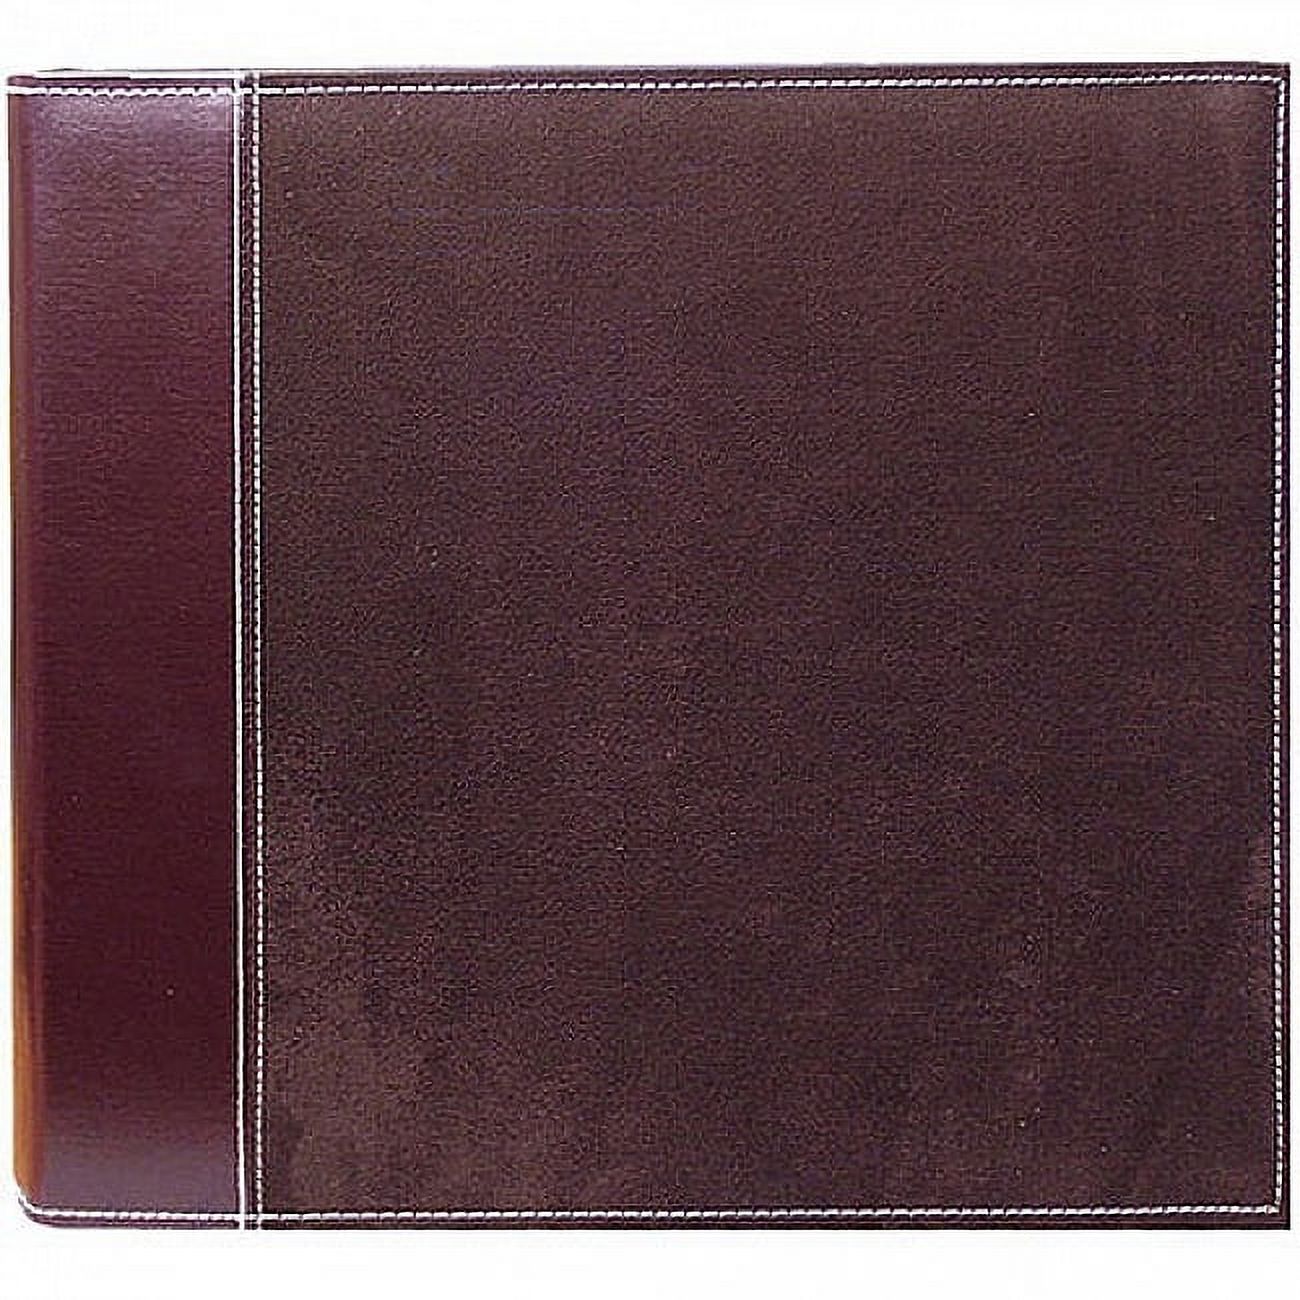 Brown Suede wide-size 3-ring 12x12 unfilled binder by Pioneer - 12x12